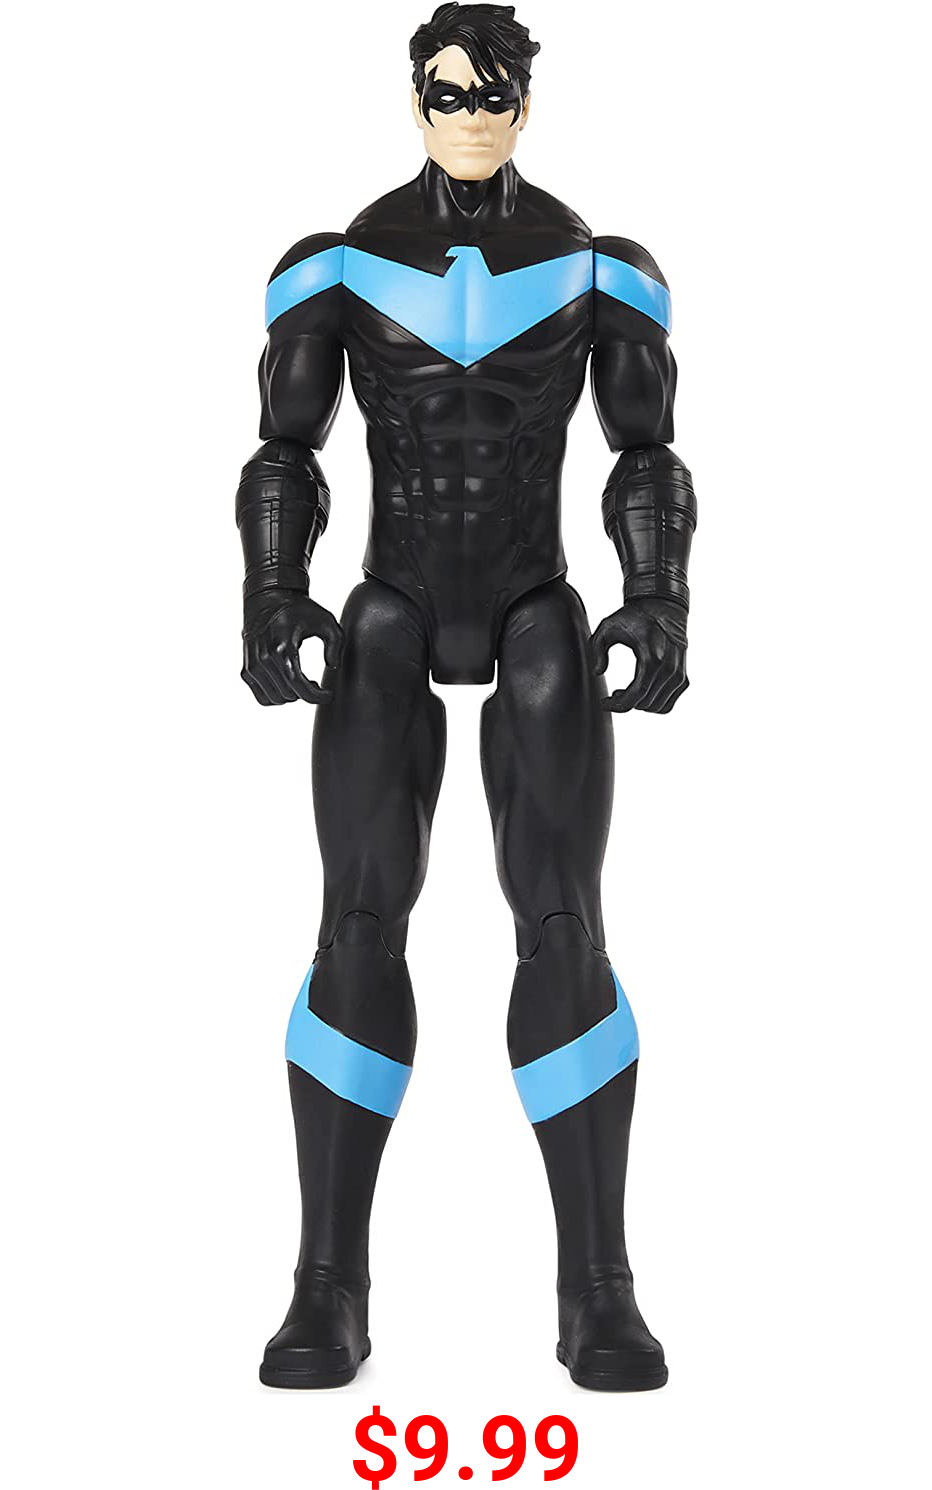 DC Comics Batman 12-inch Nightwing Action Figure, Kids Toys for Boys Aged 3 and up